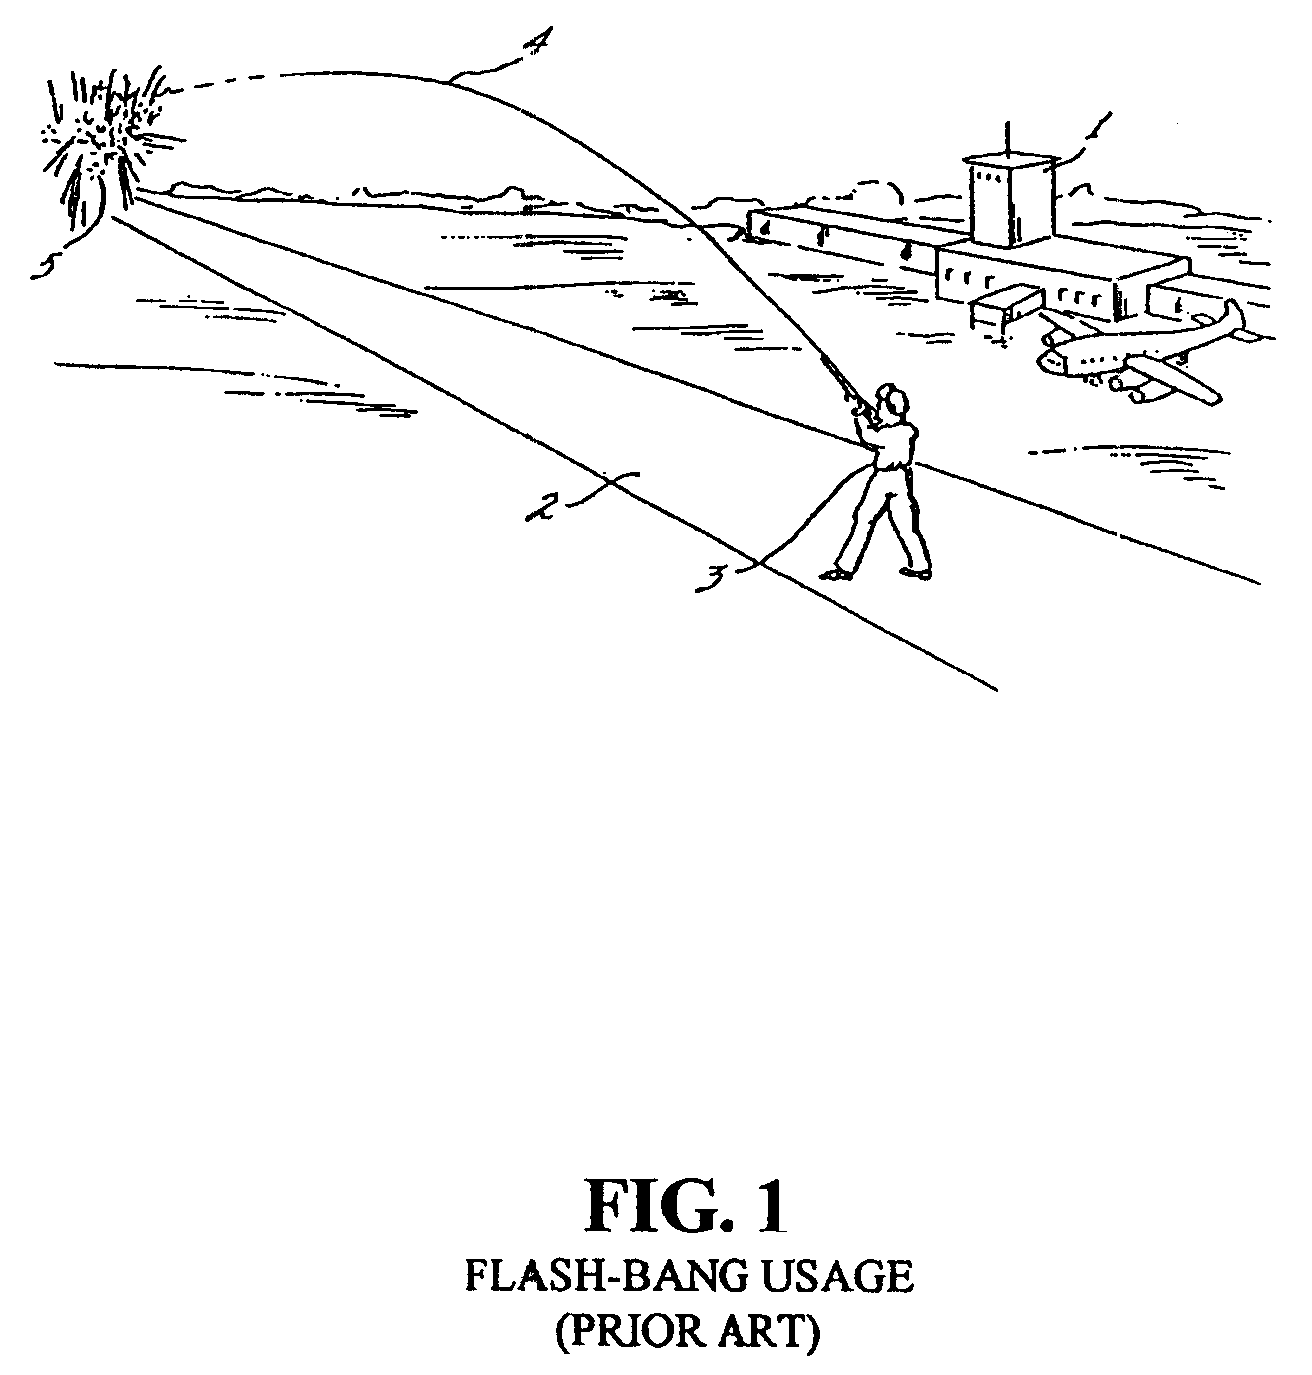 Flare-bang projectile